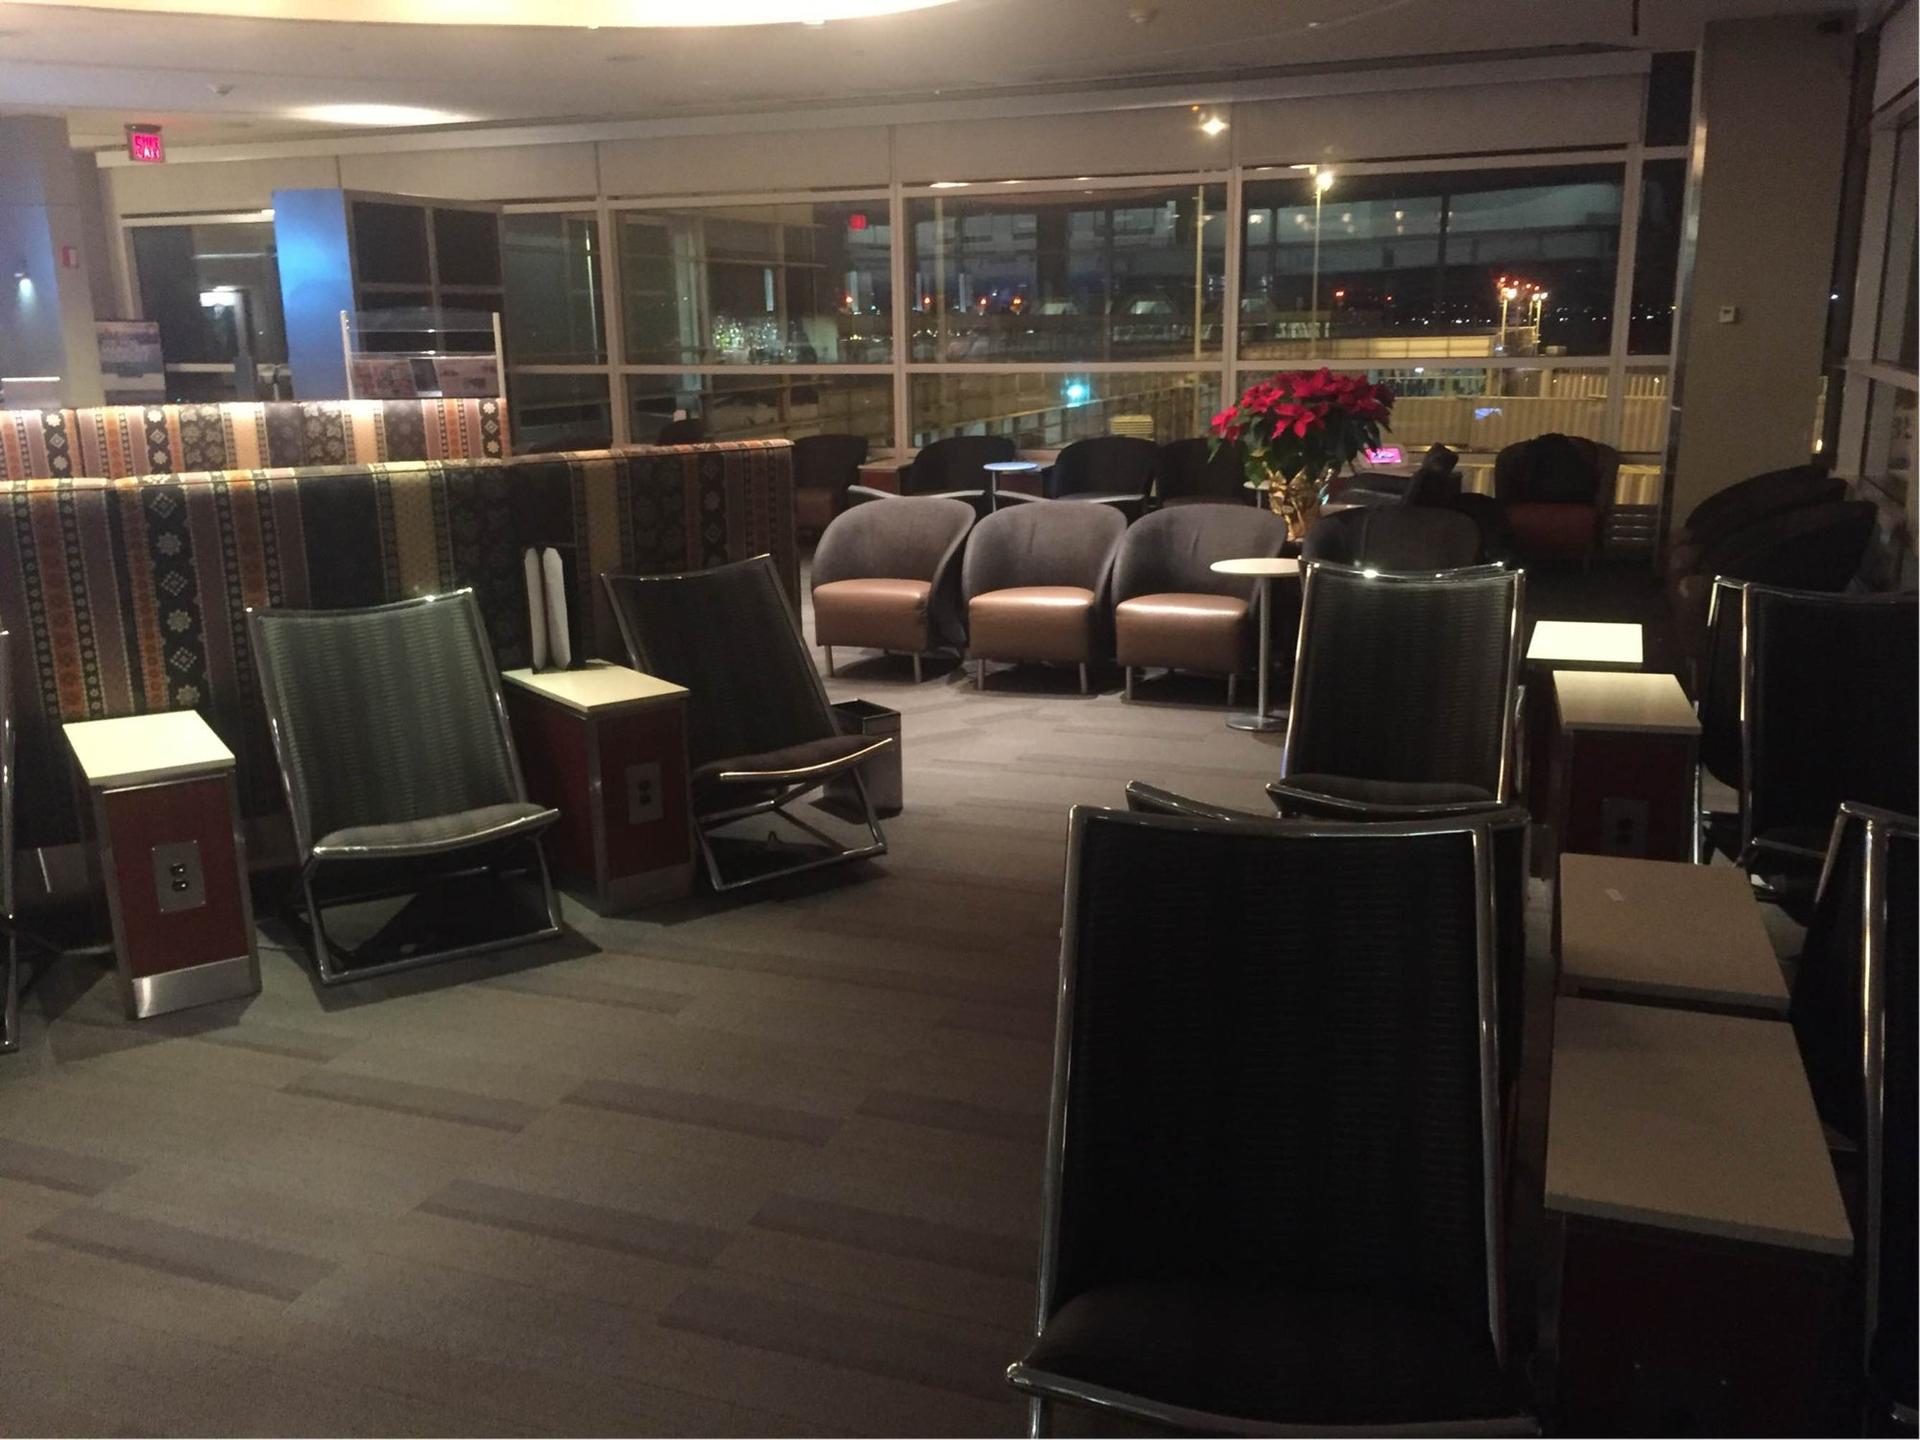 American Airlines Admirals Club image 15 of 22